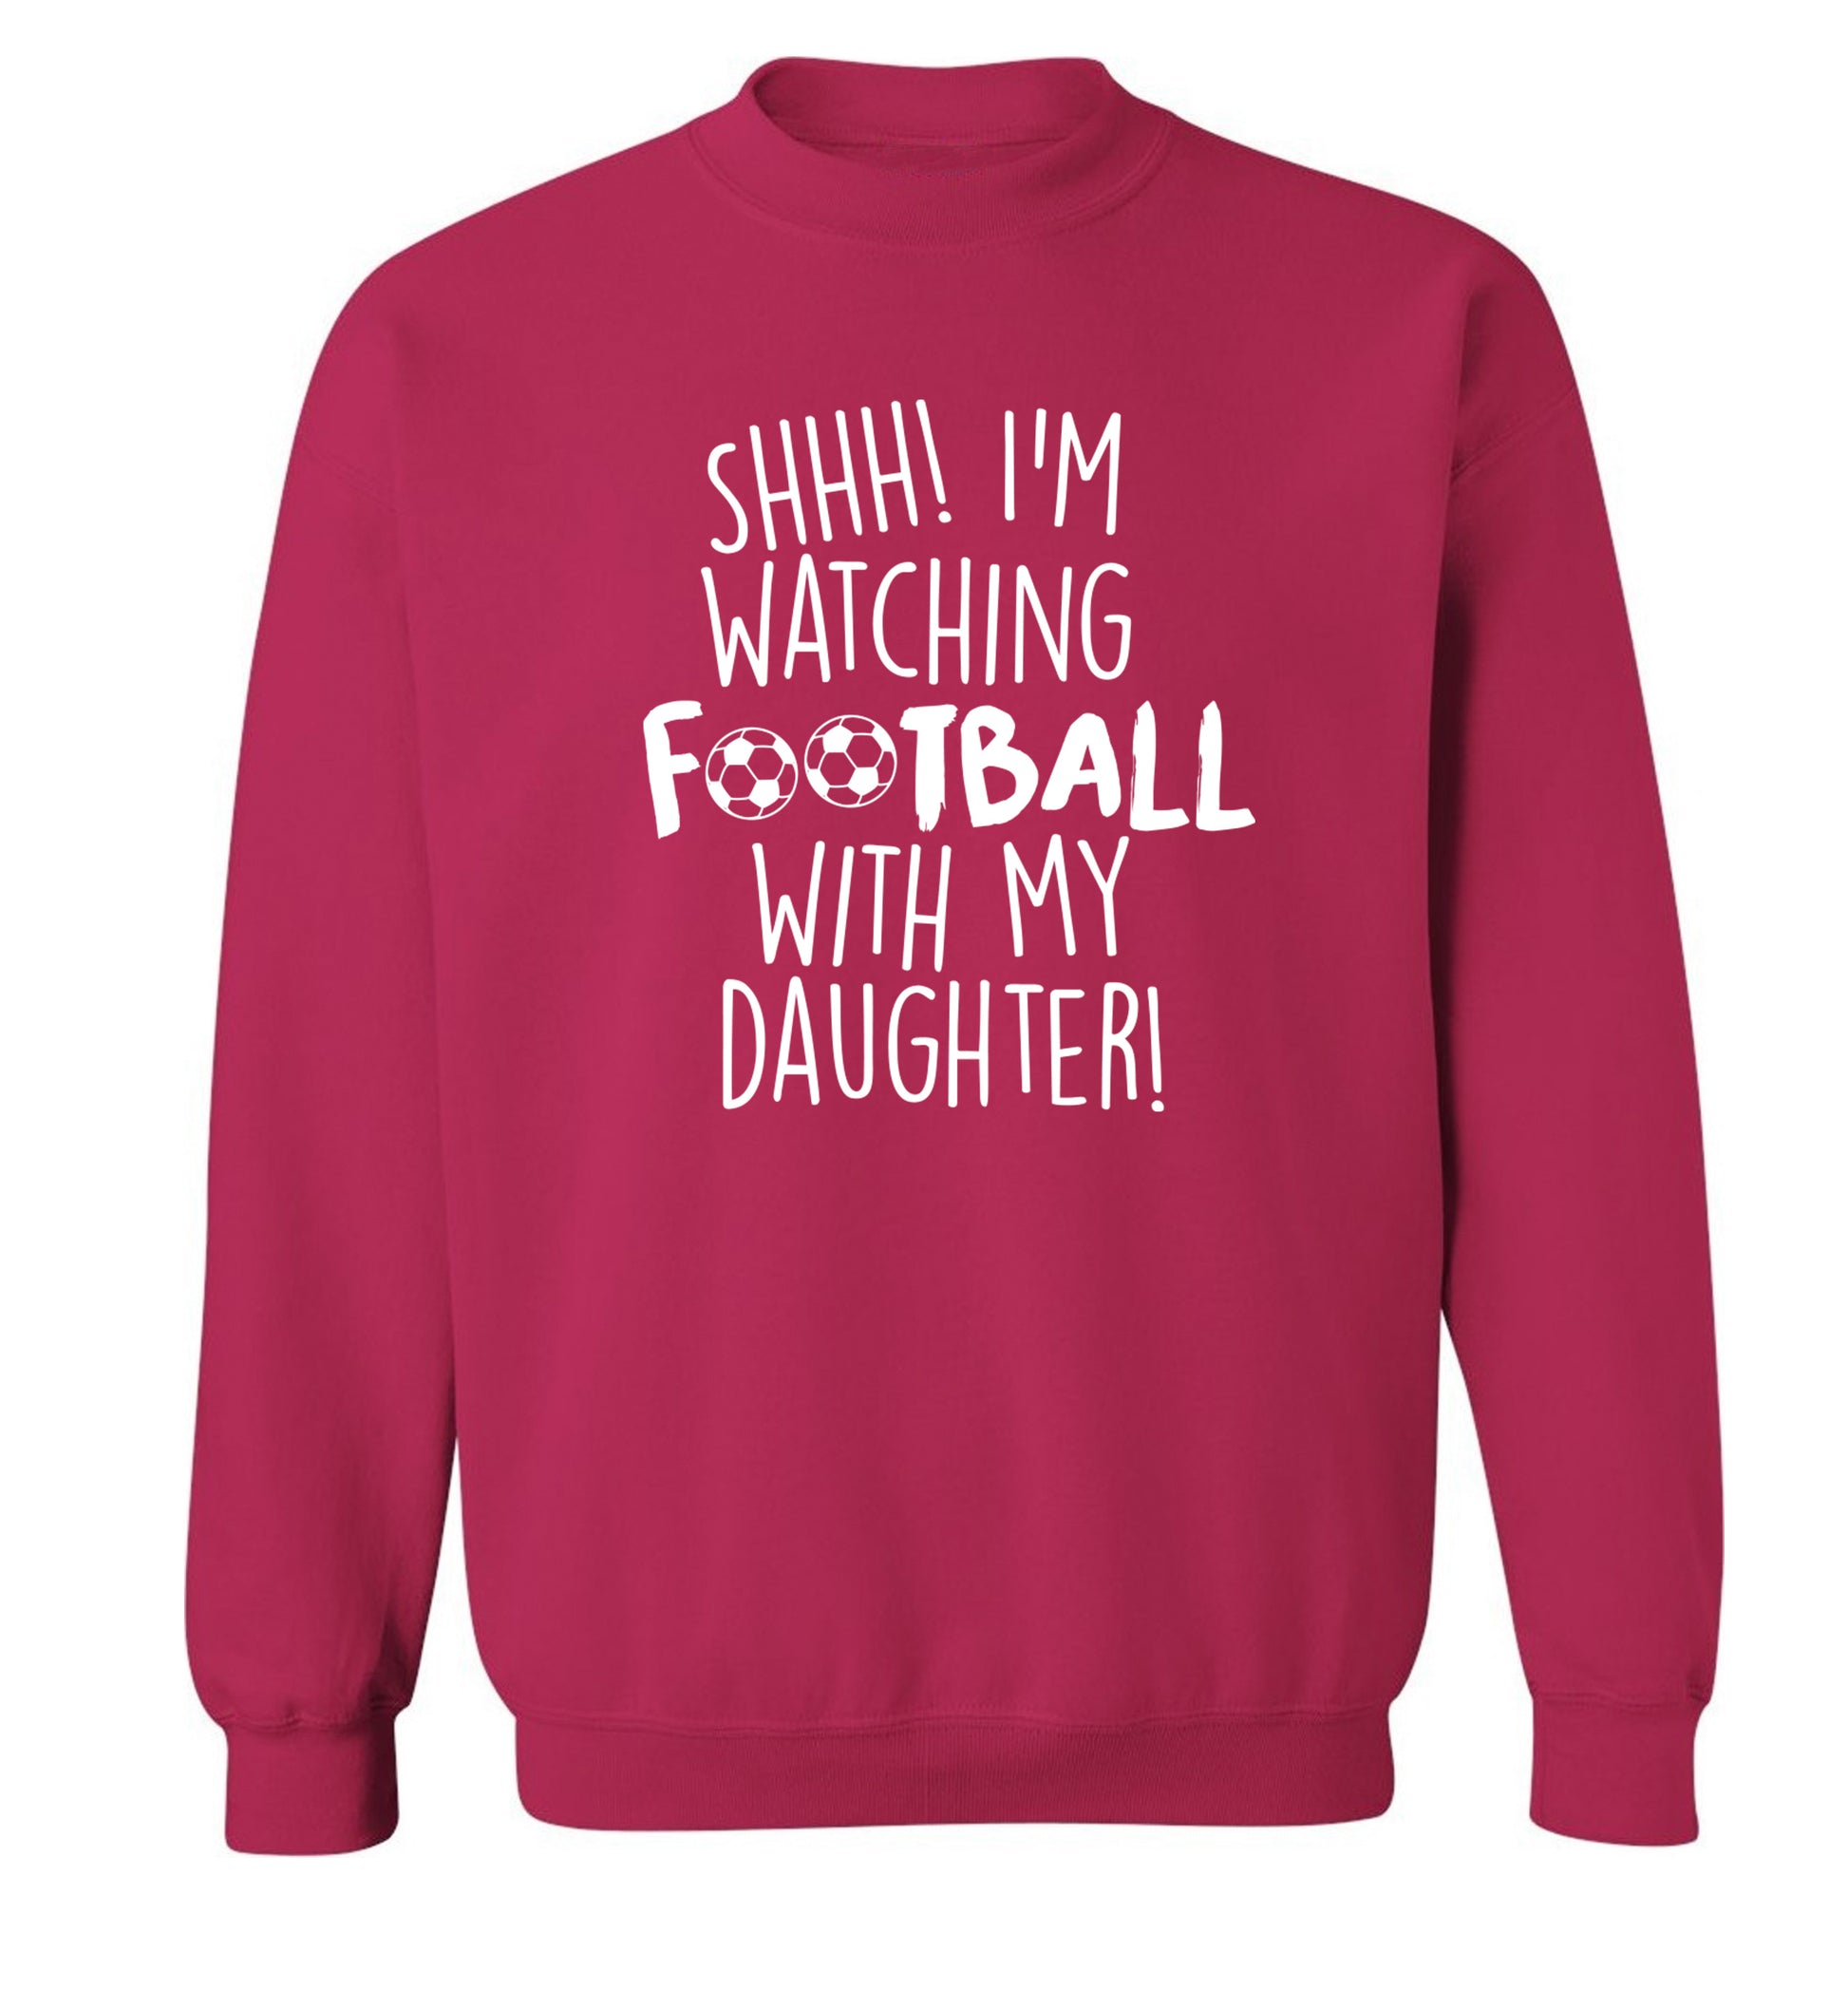 Shhh I'm watching football with my daughter Adult's unisexpink Sweater 2XL